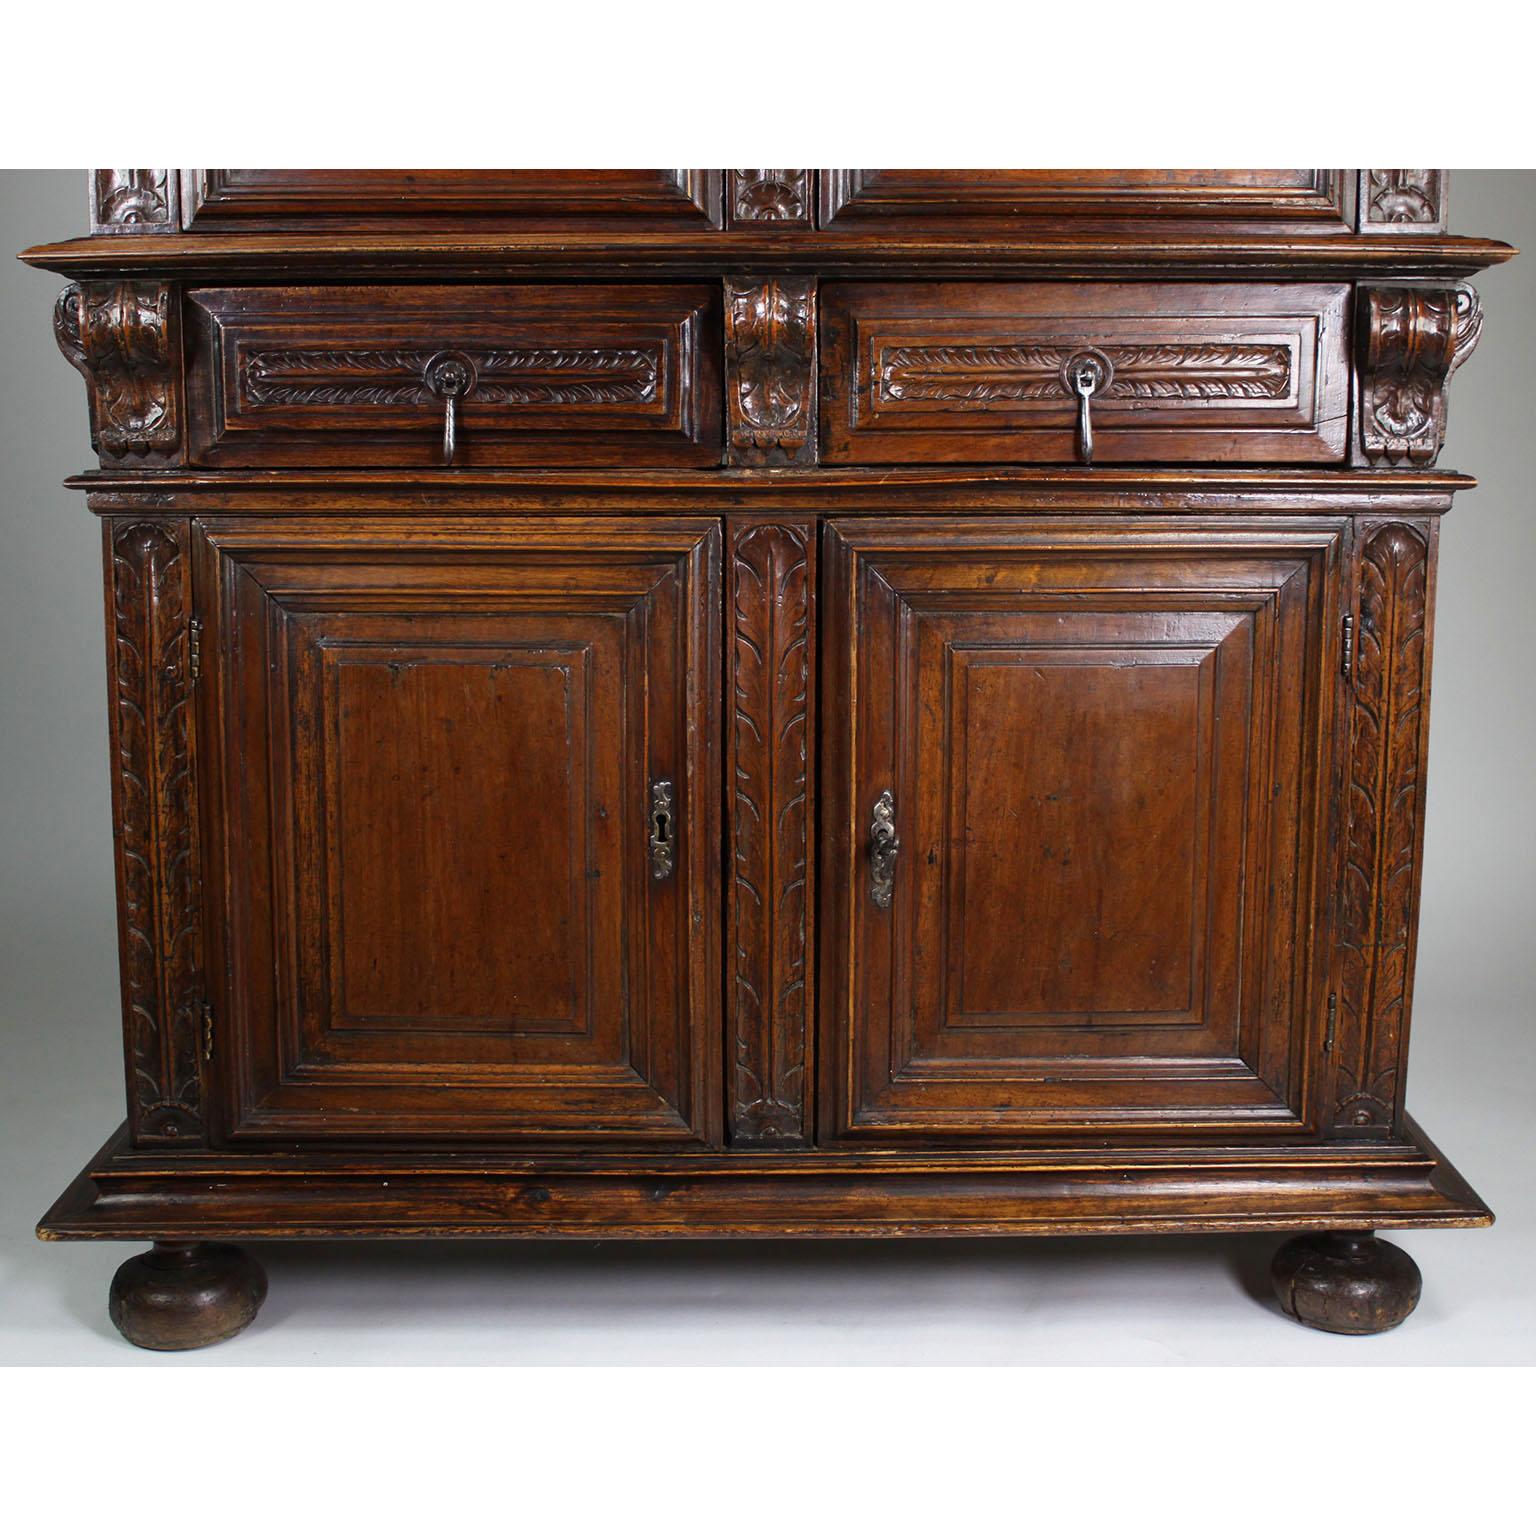 A 17th-18th Century French/Italian Renaissance Walnut Carved Credenza Cabinet For Sale 1